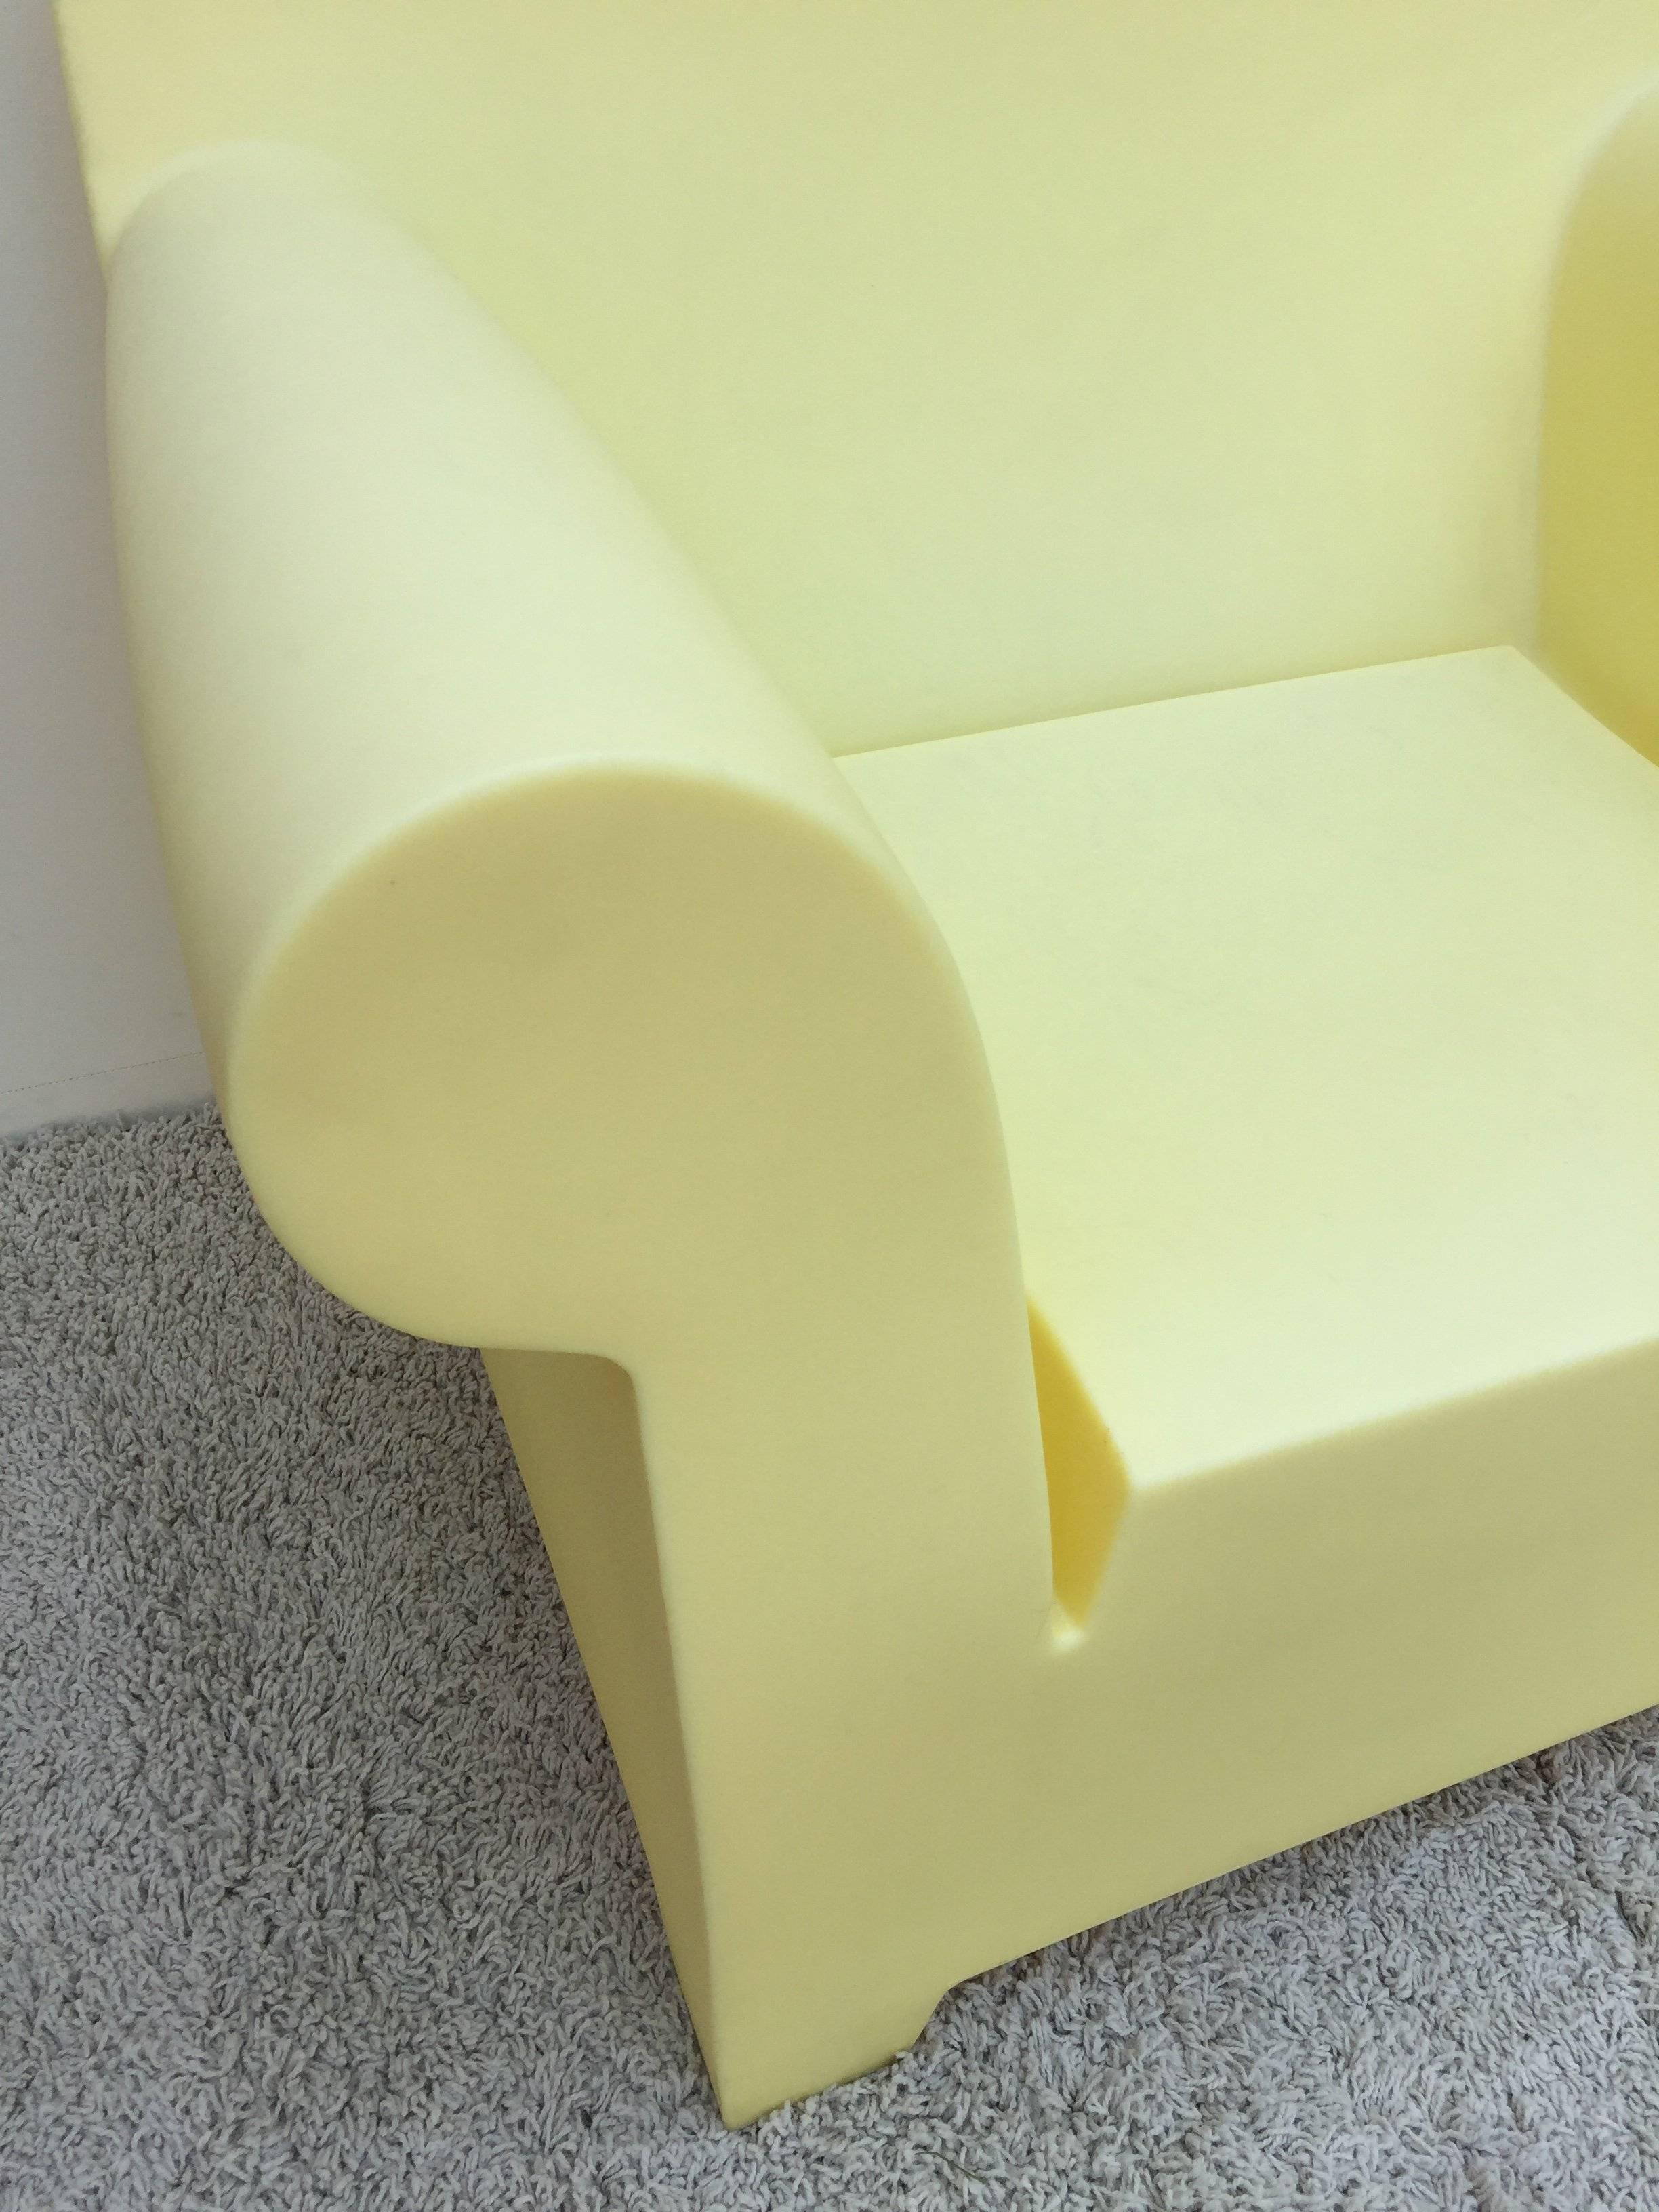 Pair of Philippe Starck yellow bubble chair made for Kartel.